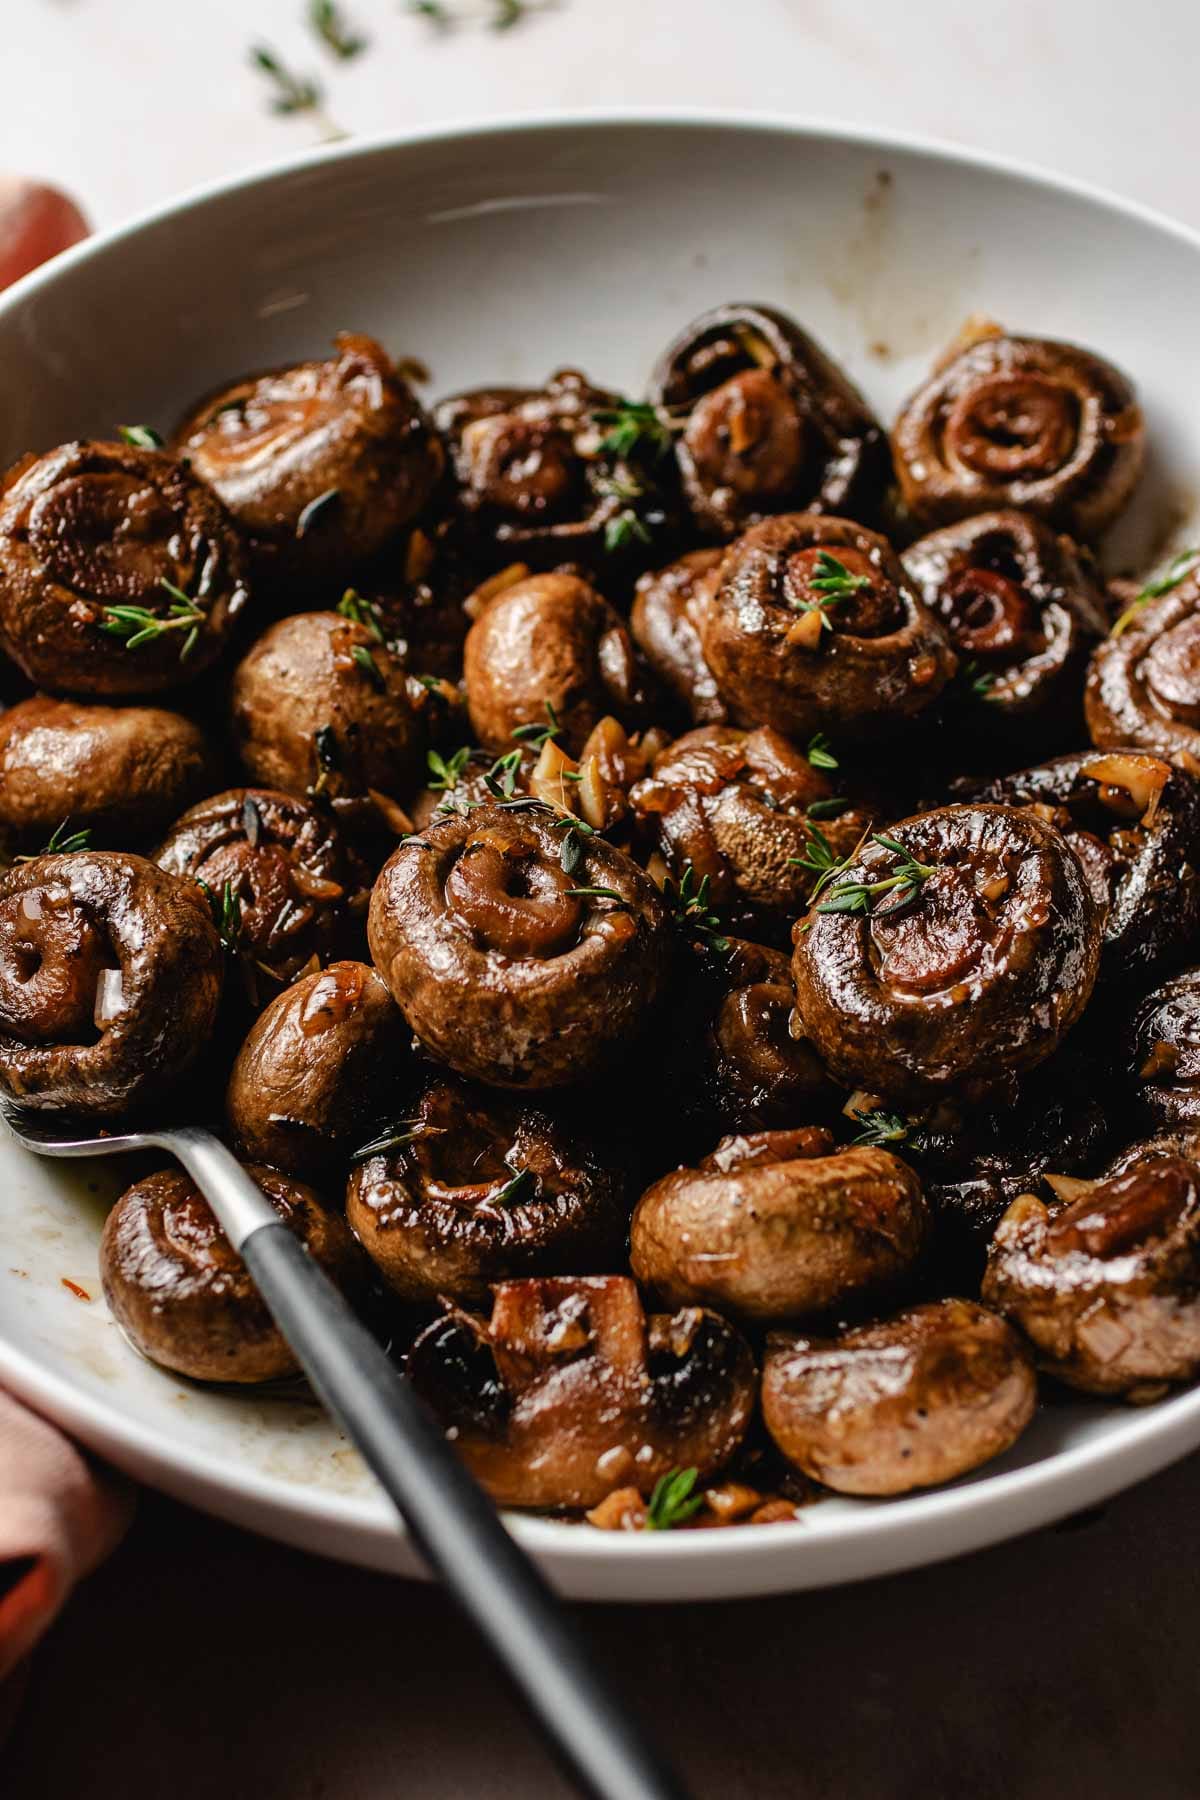 Image shows sauteed steakhouse mushrooms served in a white plate with thyme garnish.